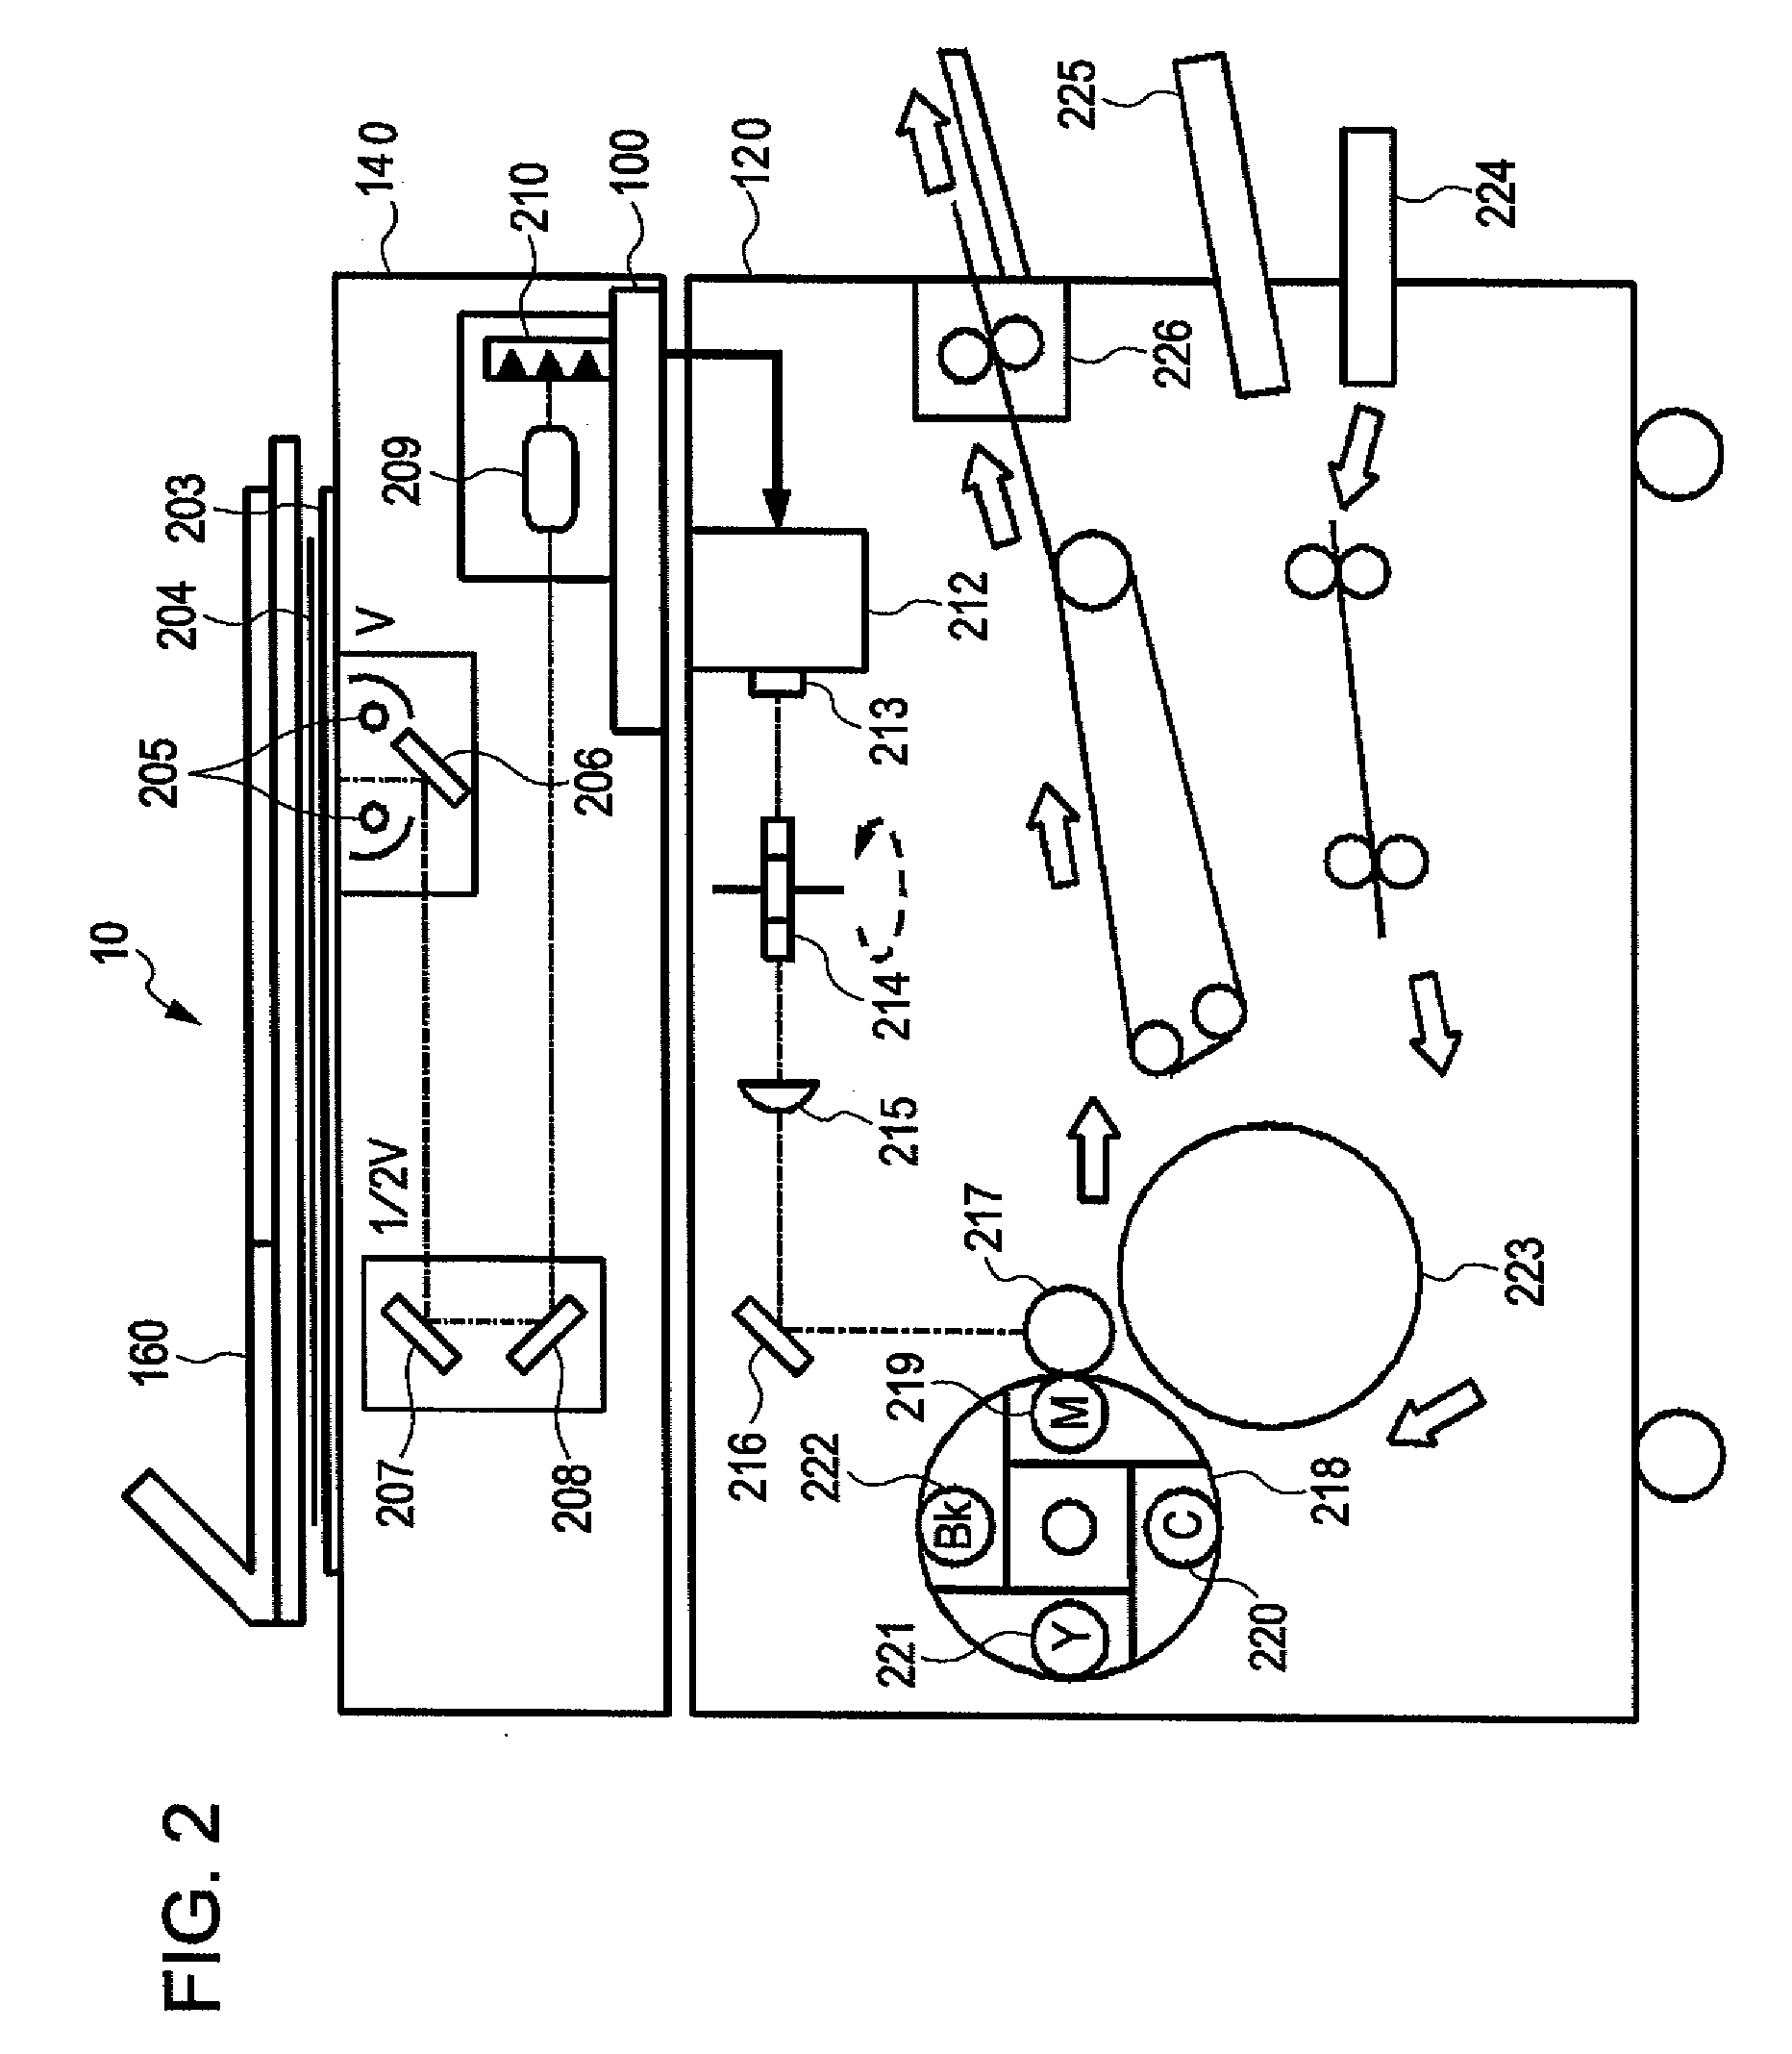 Image processing apparatus and method of starting image processing apparatus